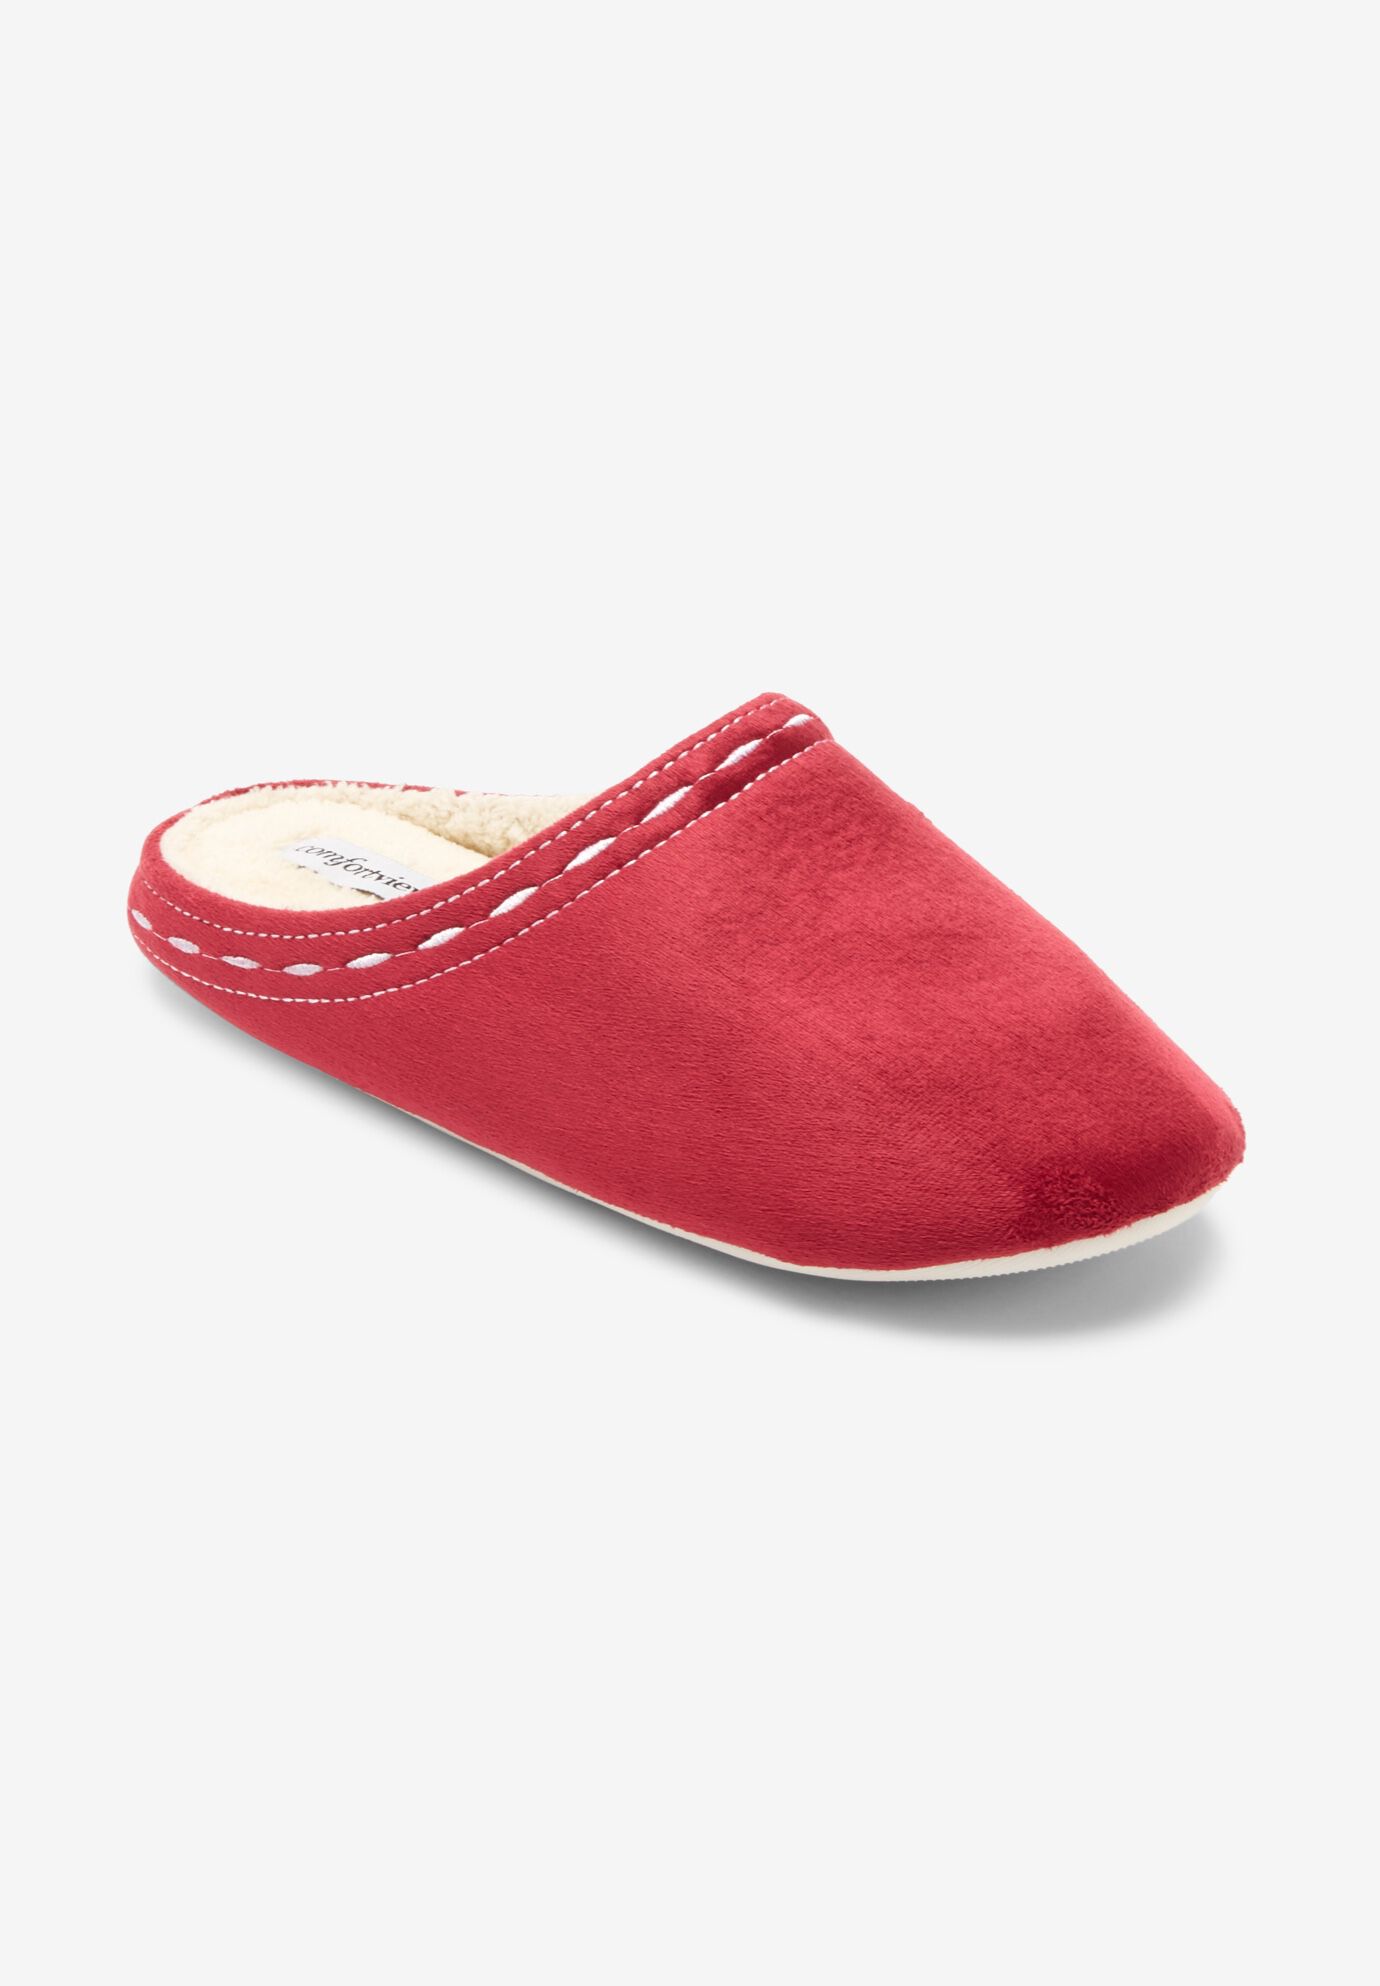 extra wide ladies slippers